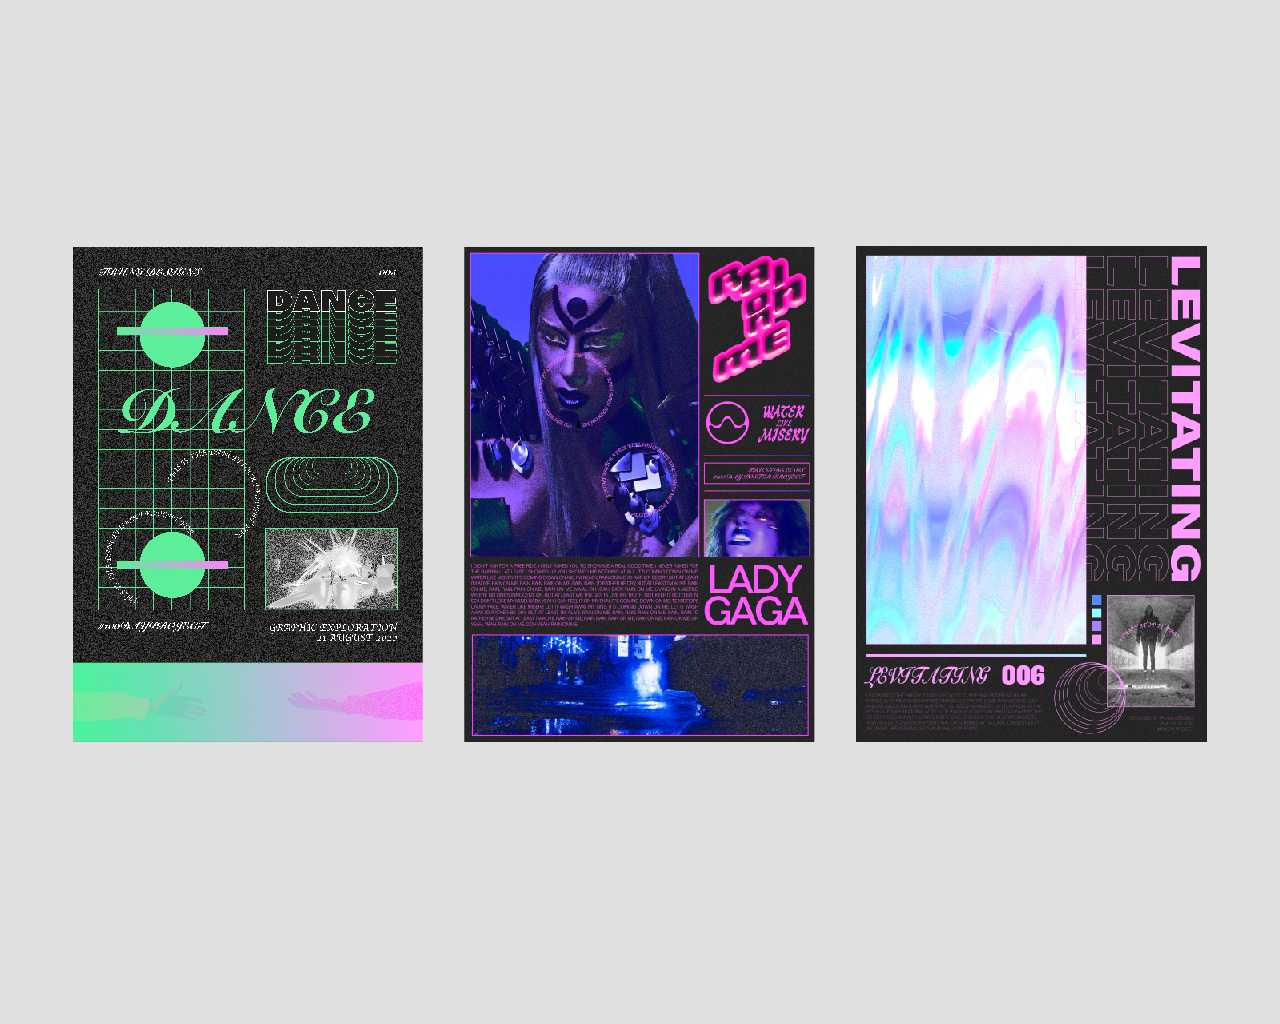 Poster series demonstrating the relation between design and dance music.